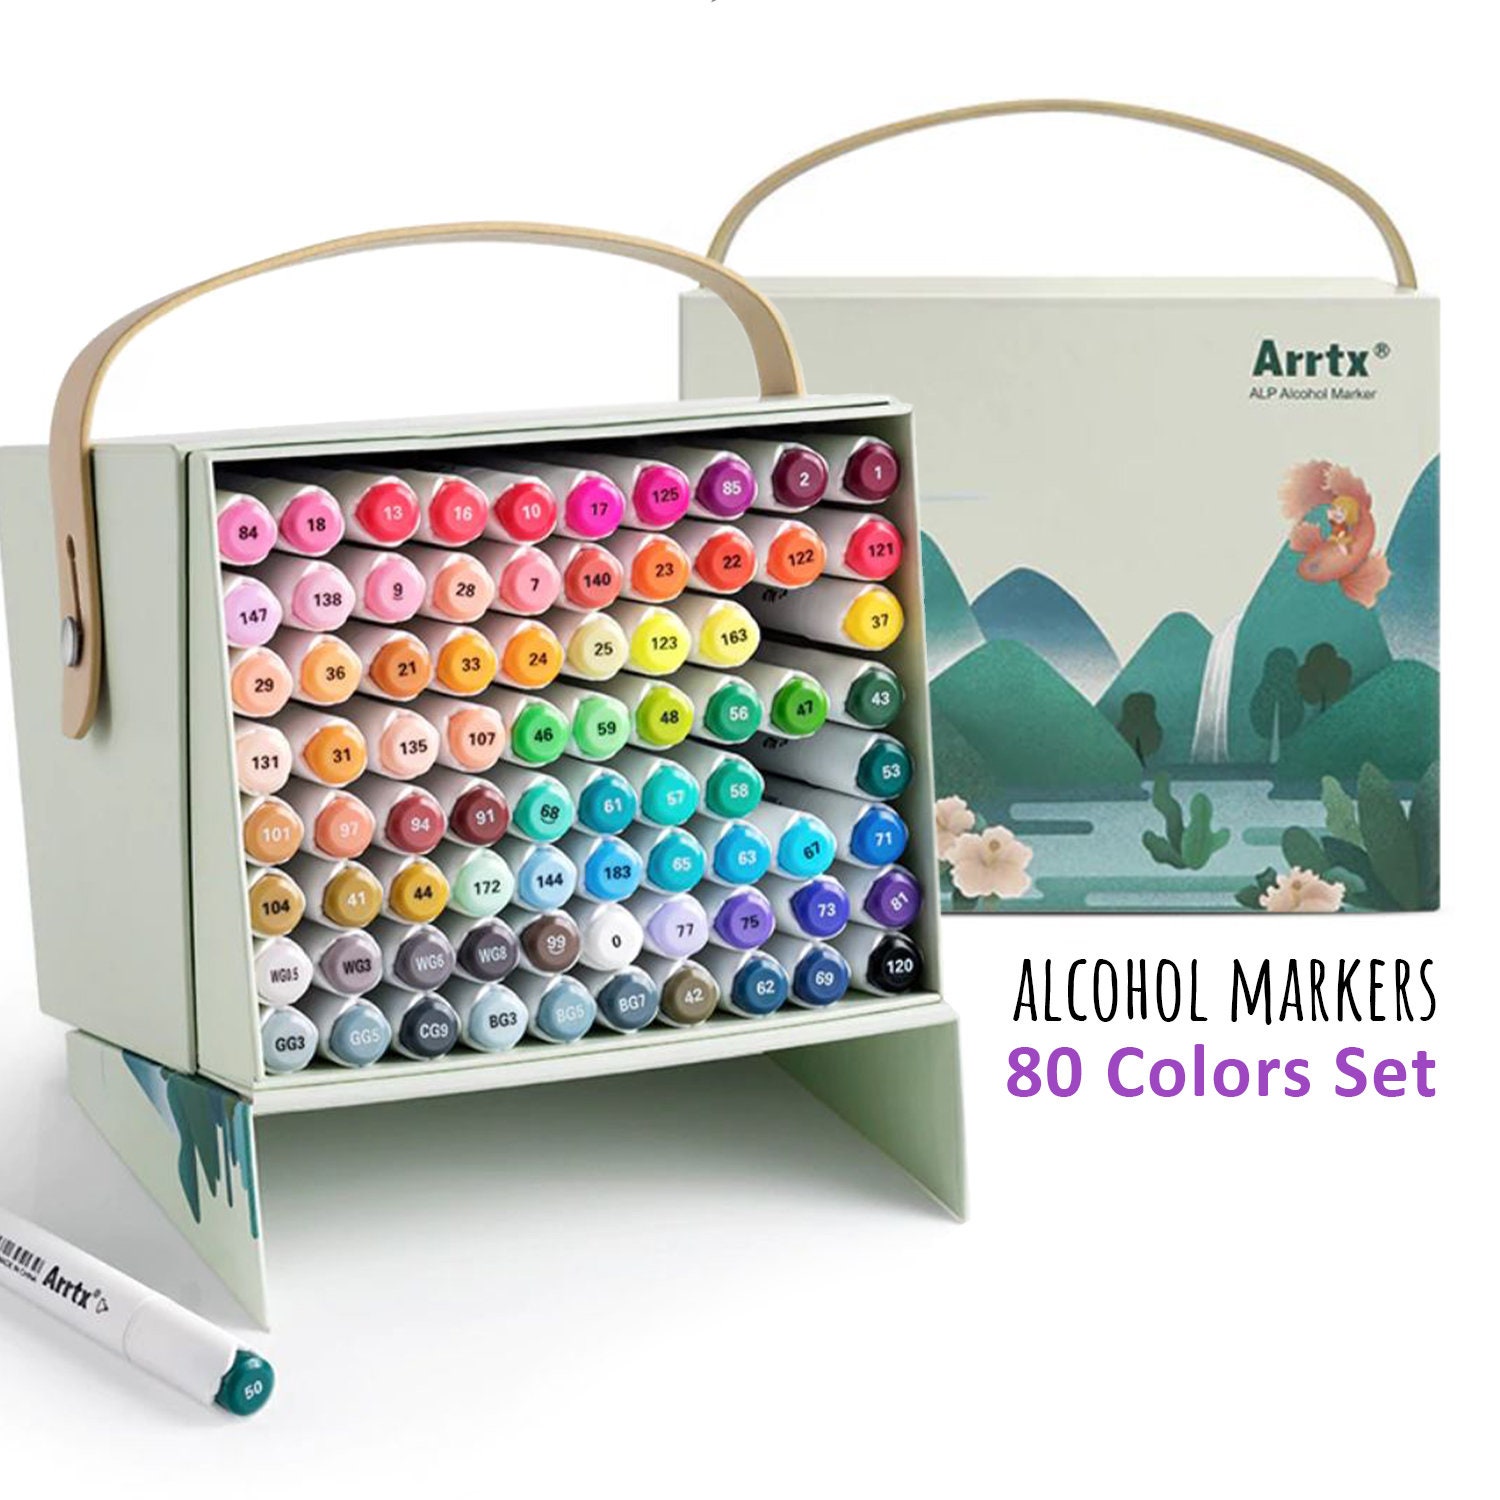 Colorya 40 Art Markers for Artists- Alcohol Markers with Dual-Tip + Carry Bag Included - Alcohol Pens for Coloring Books for Adults, Drawing, Sketchin